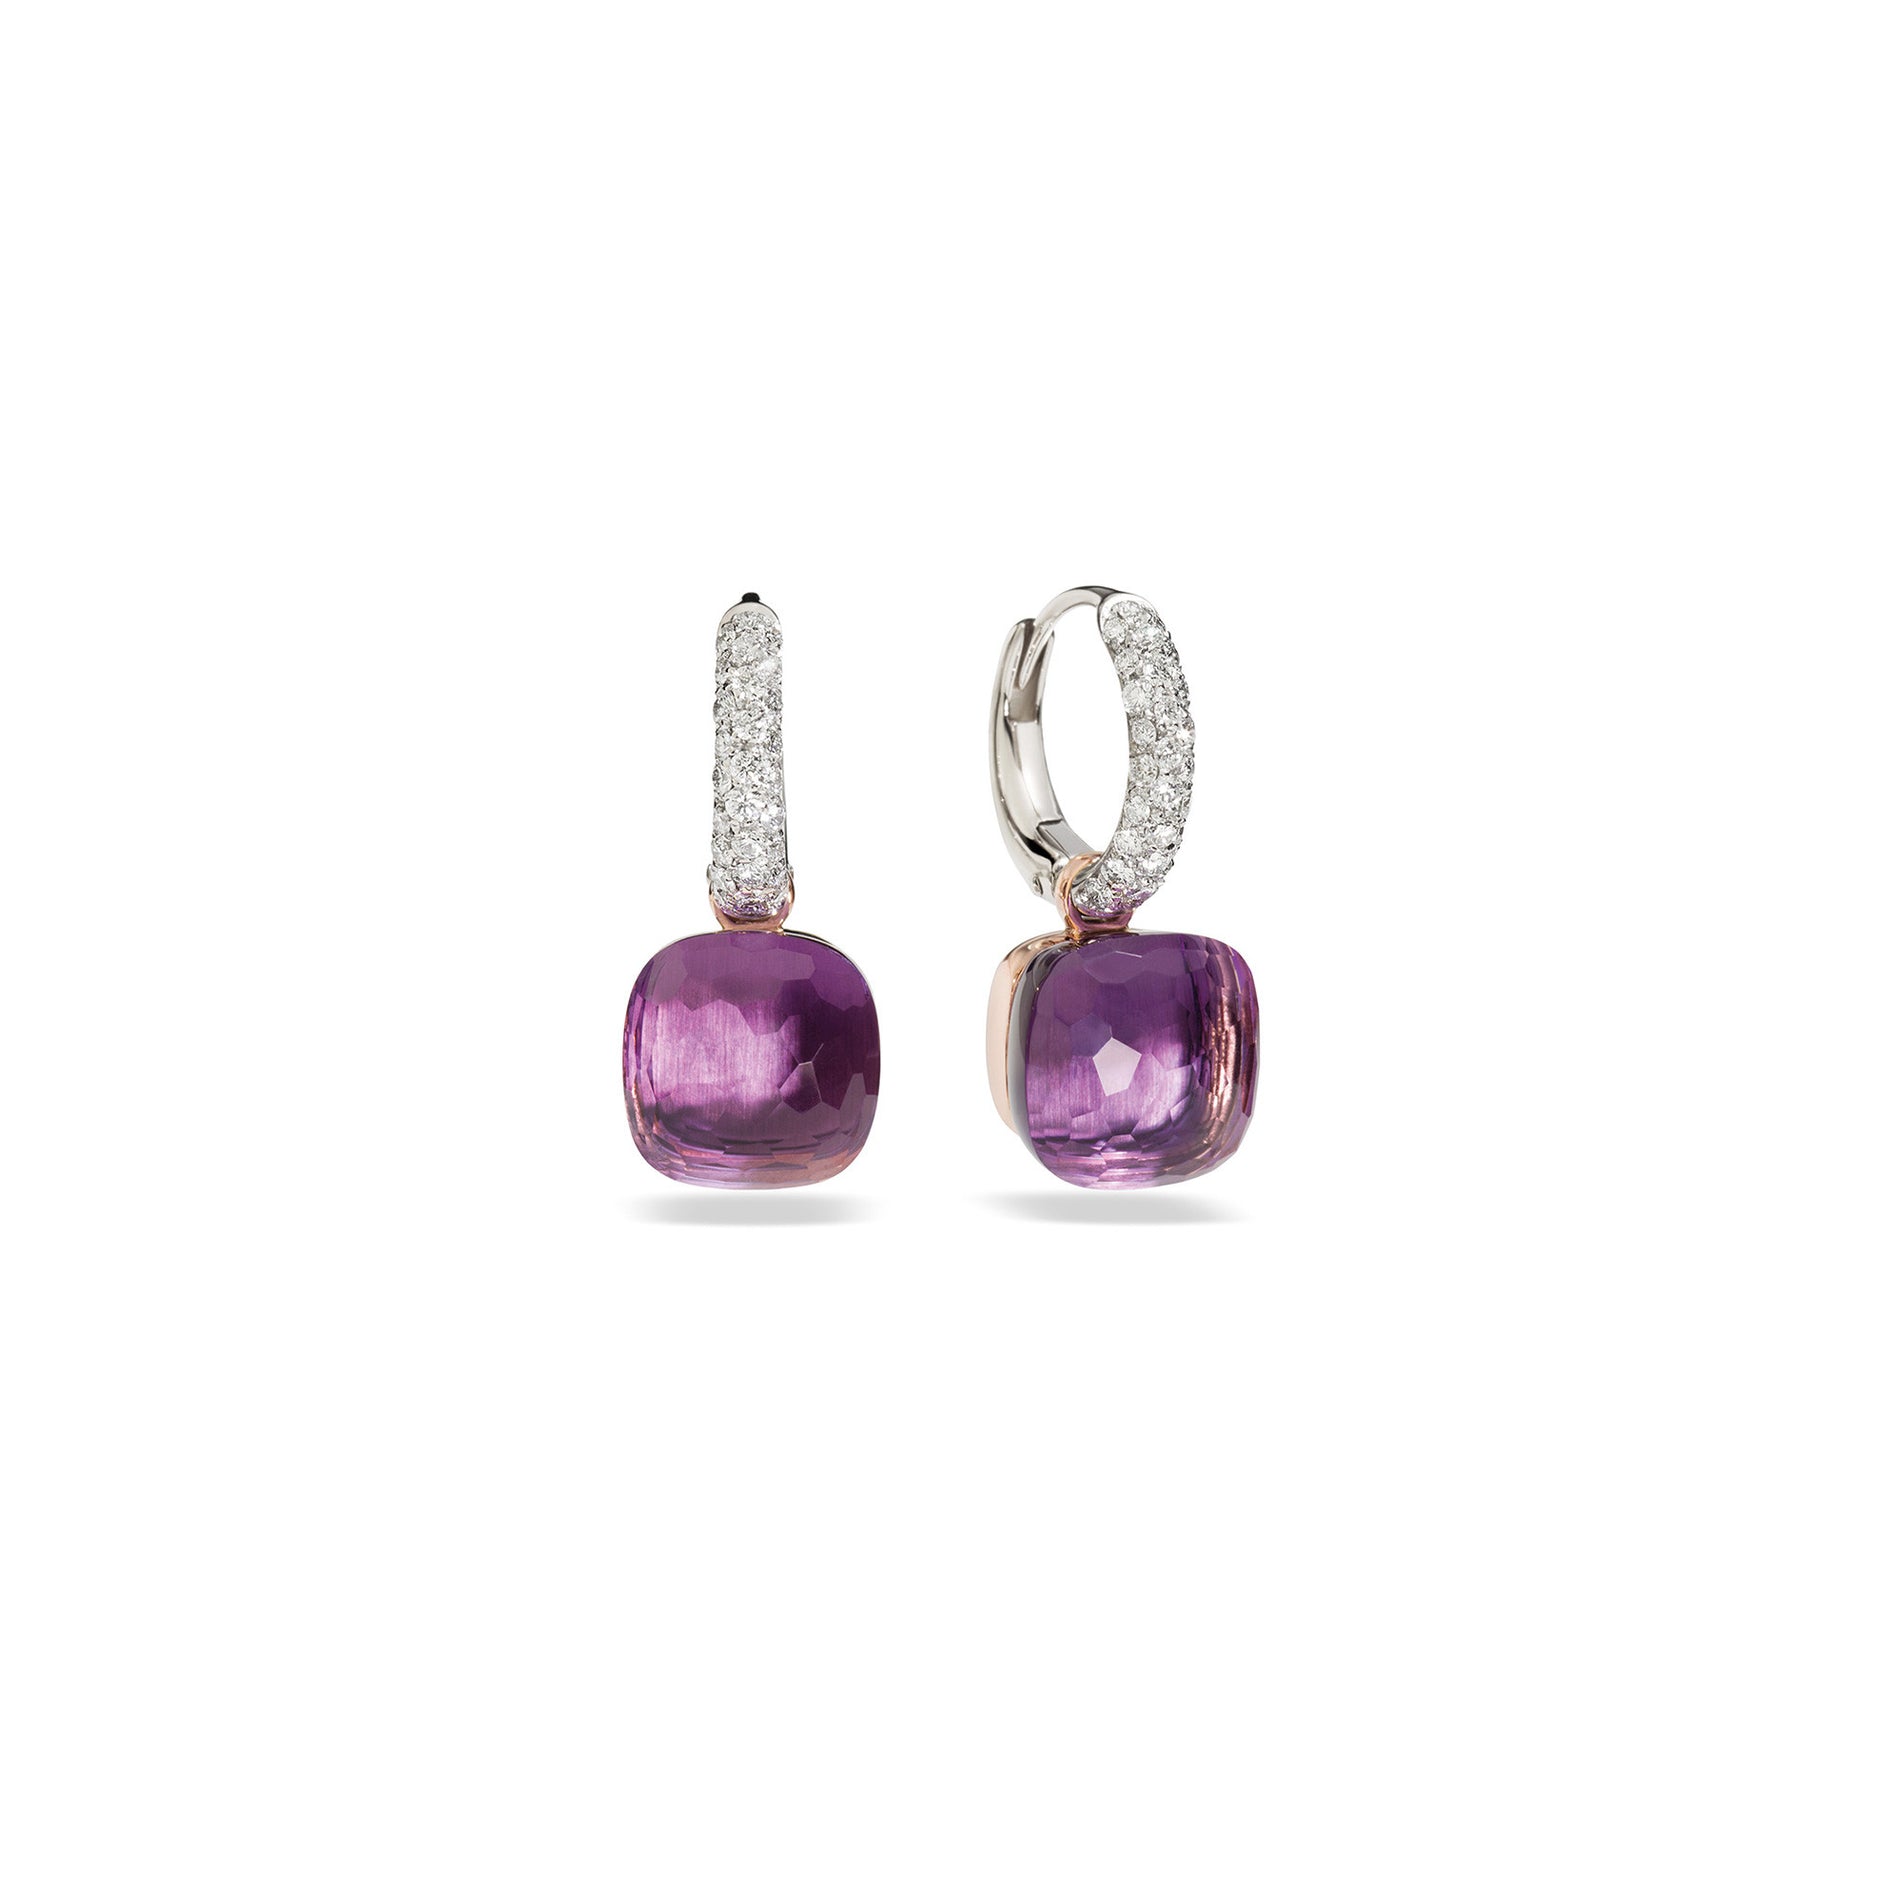 Nudo Classic Earrings in 18k Rose and White Gold with Amethyst and Diamonds - Orsini Jewellers NZ